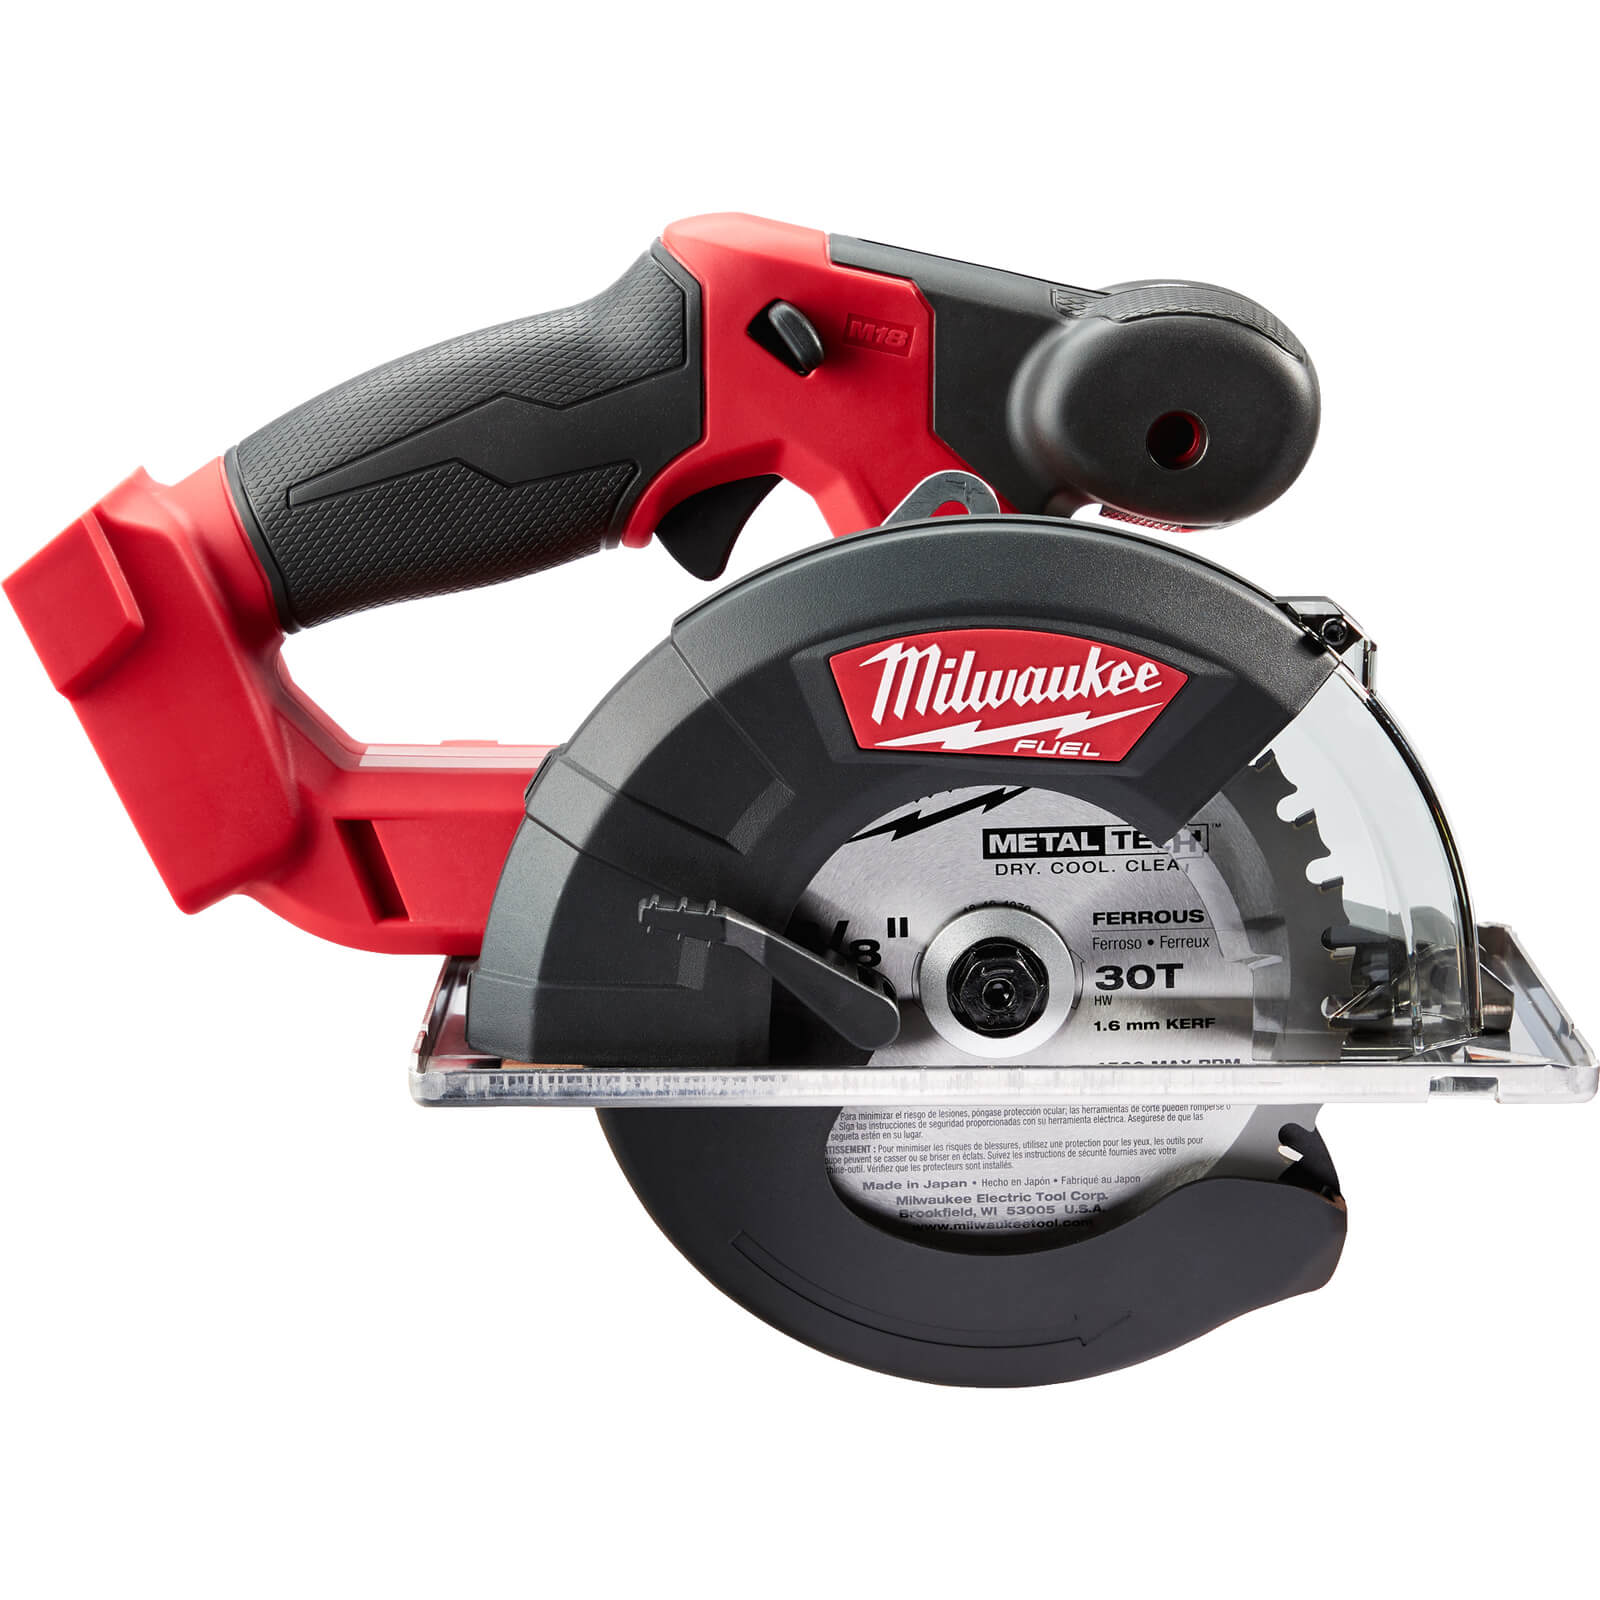 Image of Milwaukee M18 FMCS Fuel 18v Cordless Brushless Metal Cutting Circular Saw 150mm No Batteries No Charger No Case